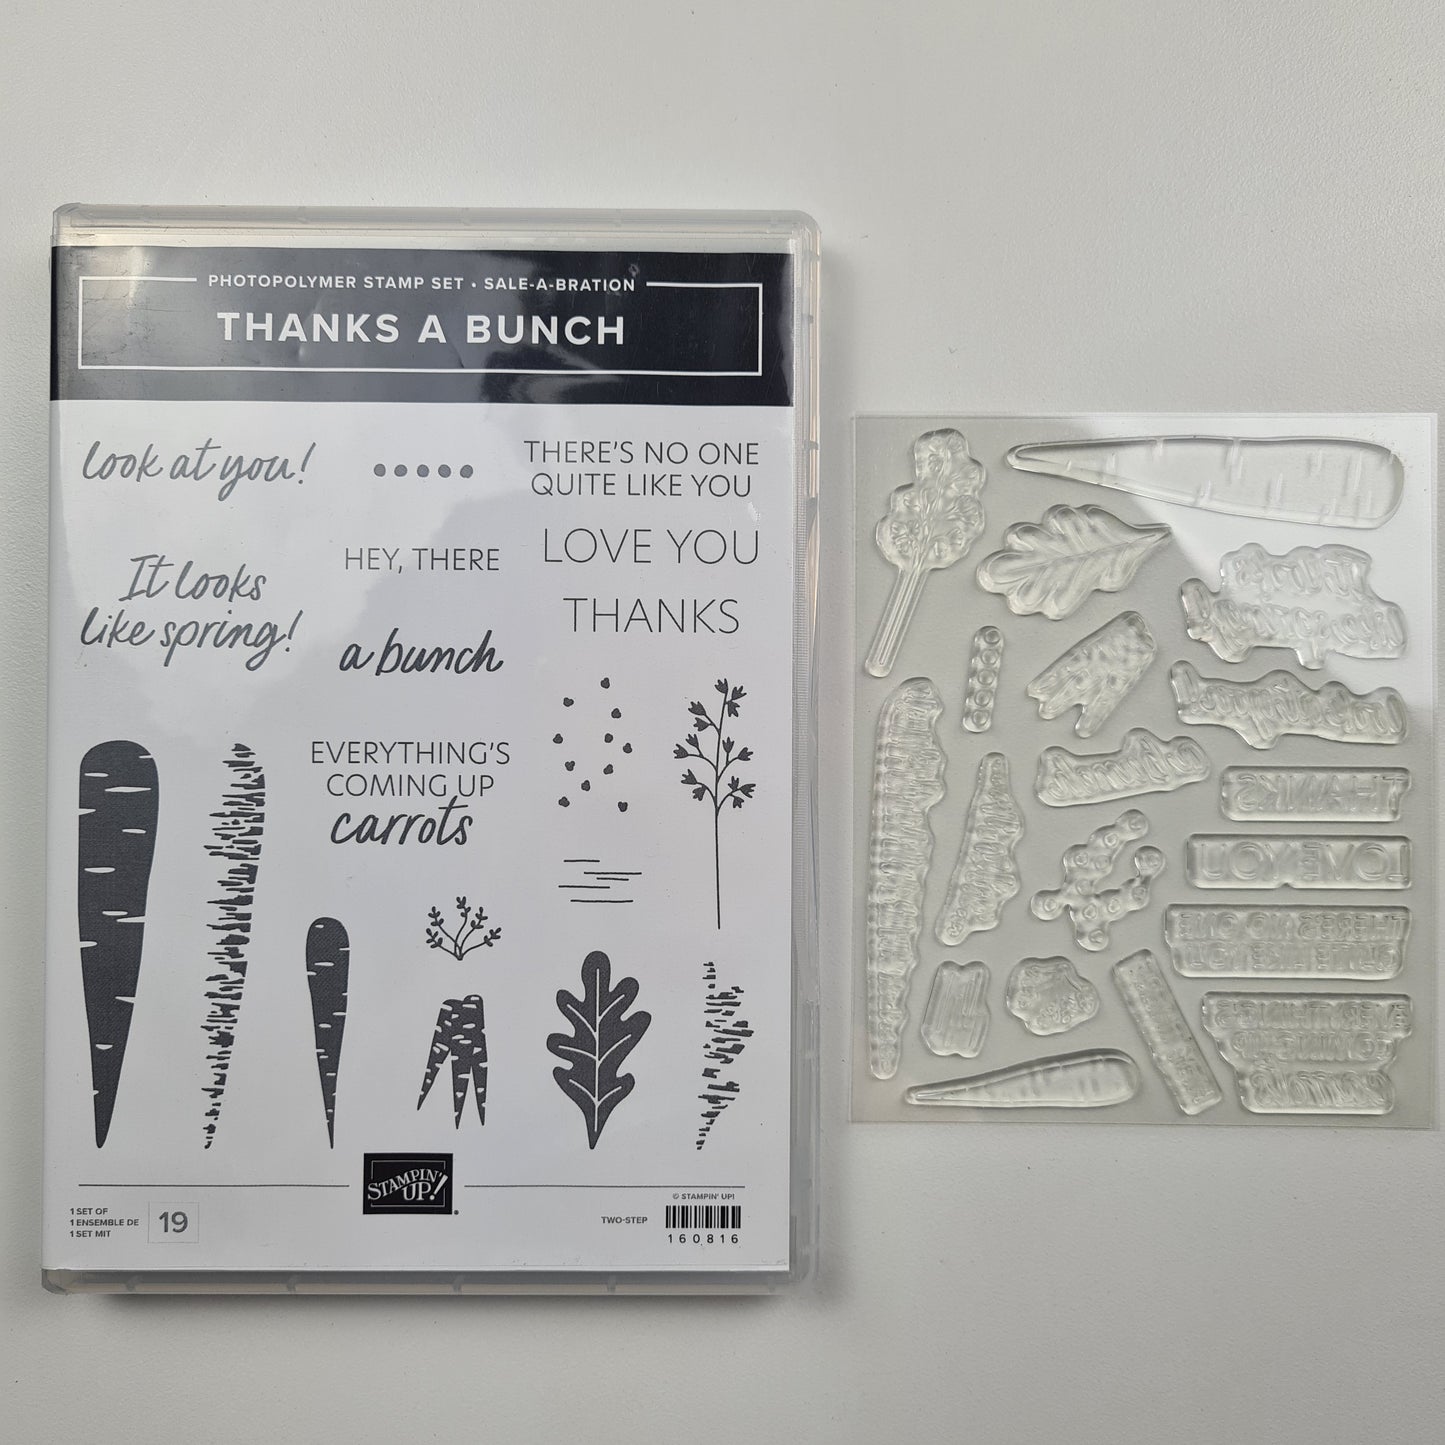 Thanks A Bunch Stampin' Up! Photopolymer Stamp Set NEW